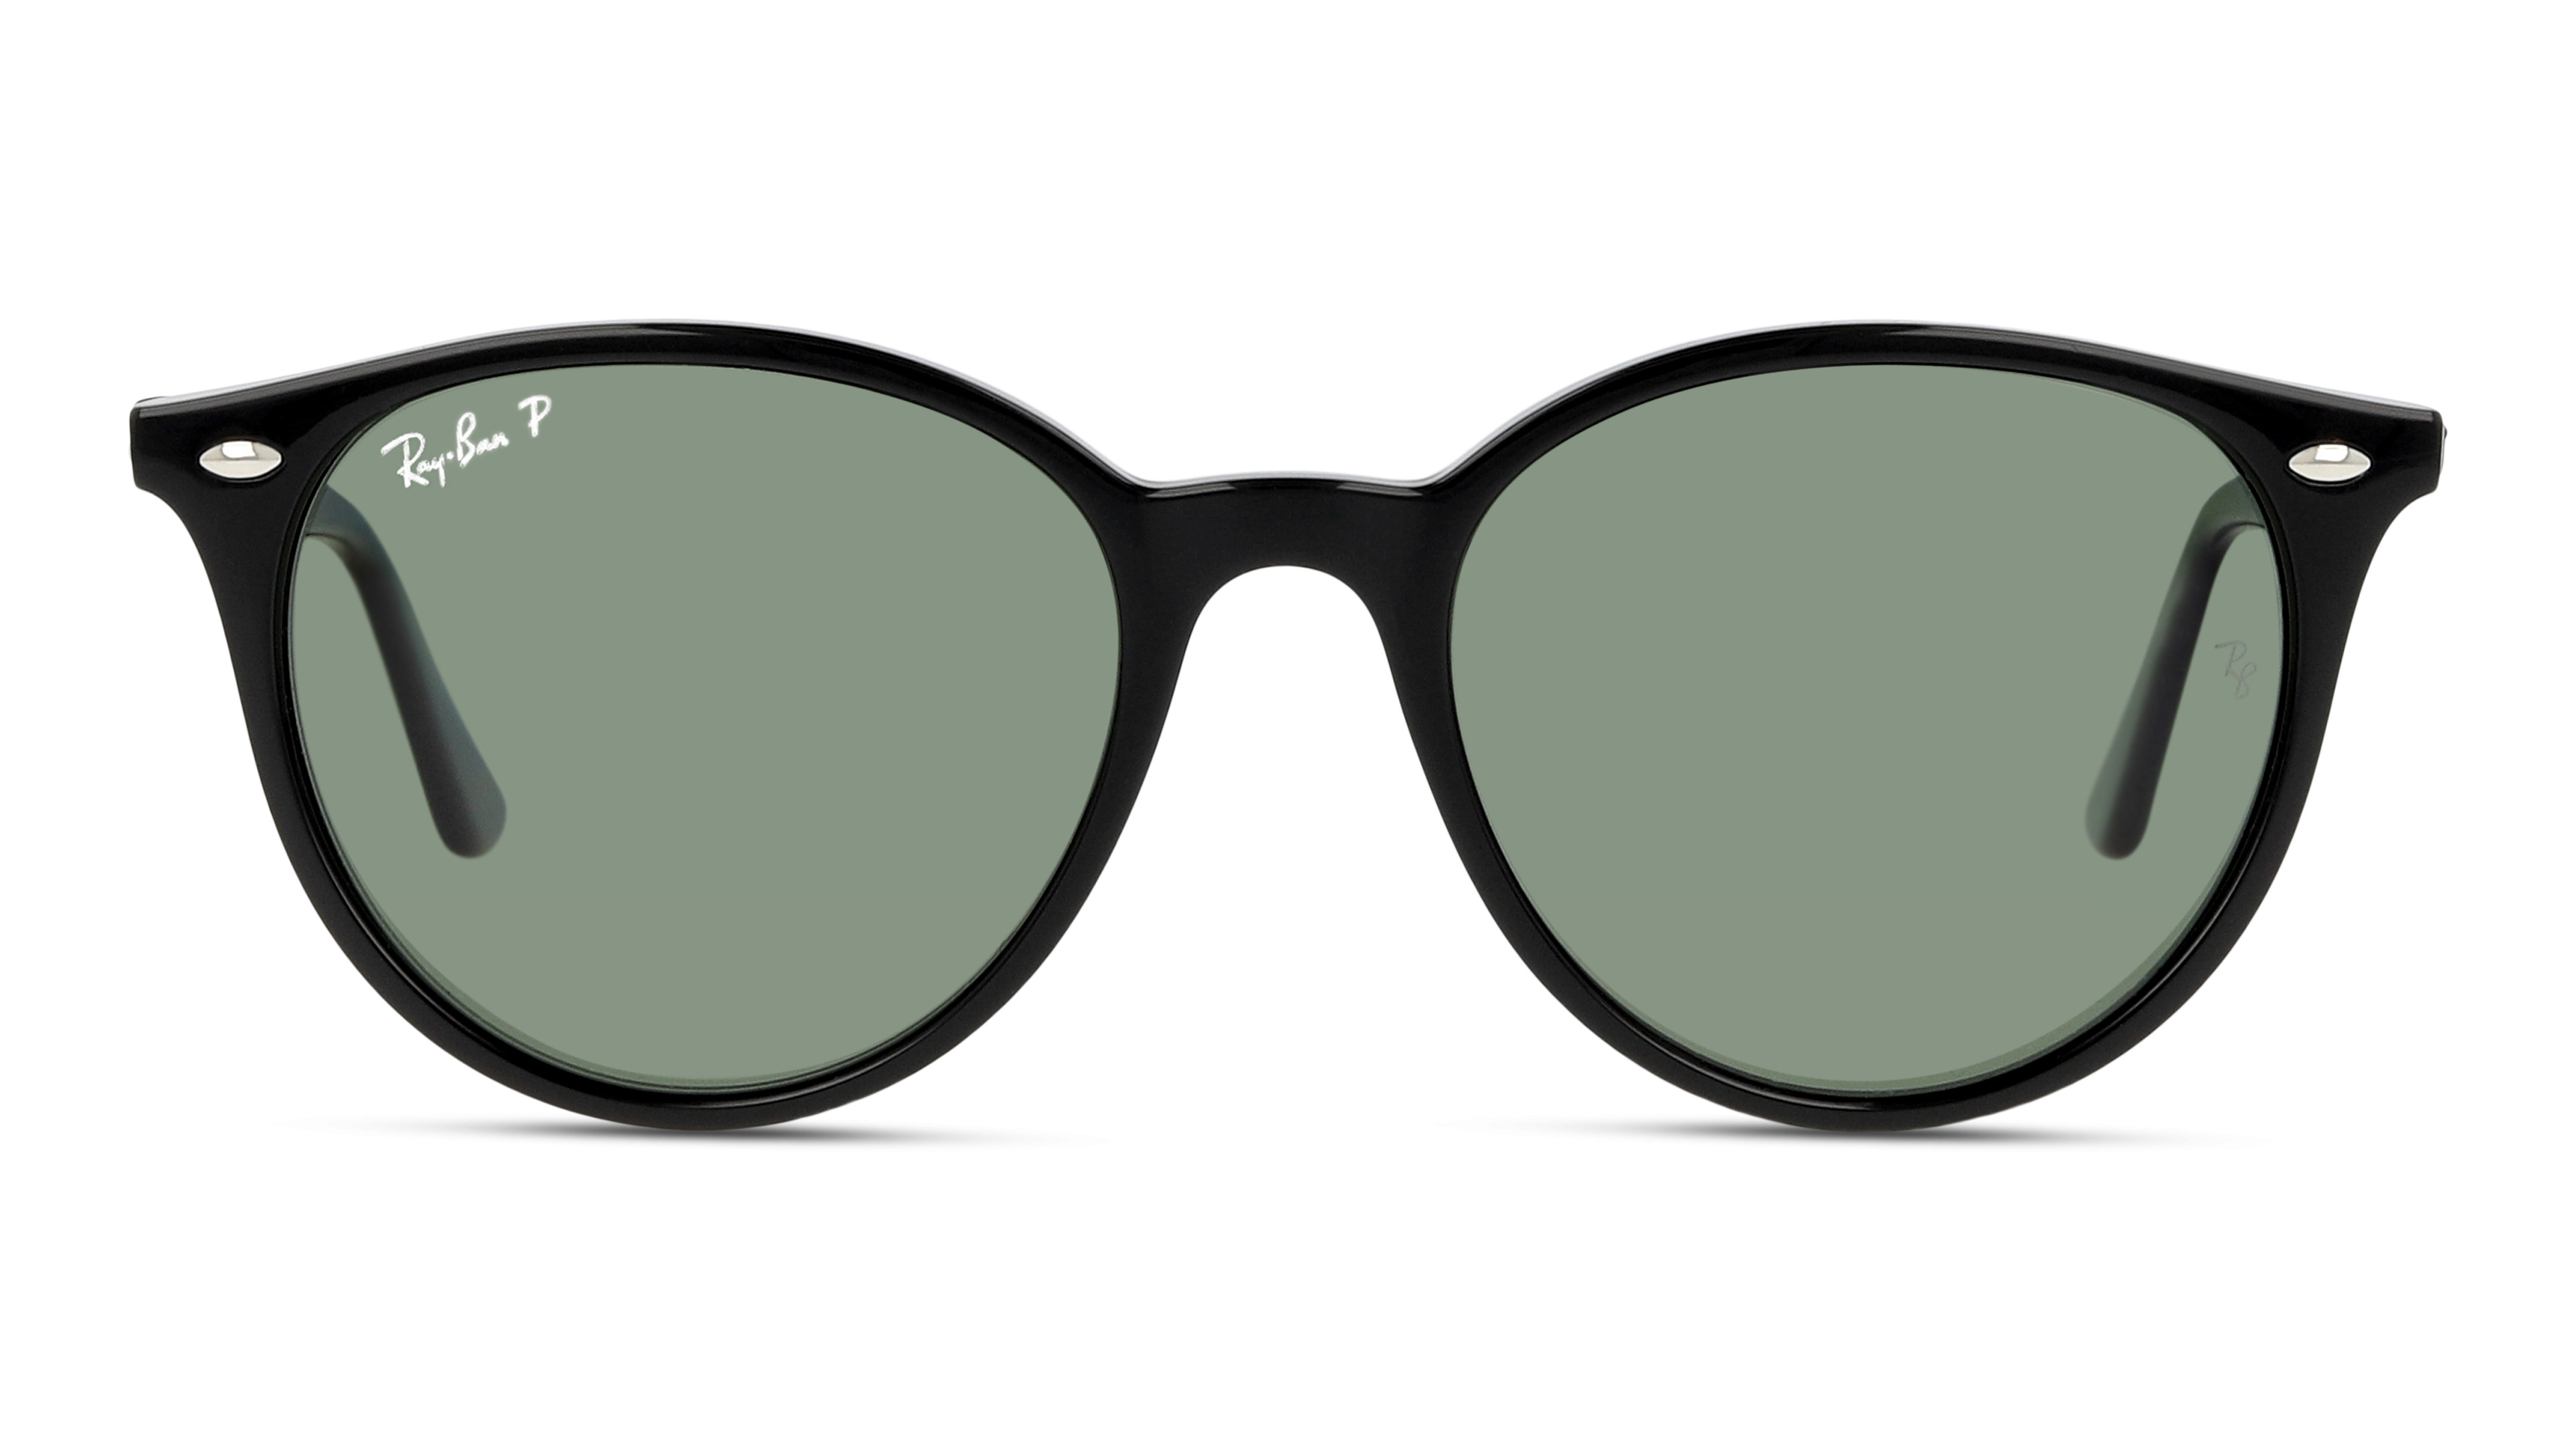 [products.image.front] Ray-Ban 0RB4305 601/9A Sonnenbrille